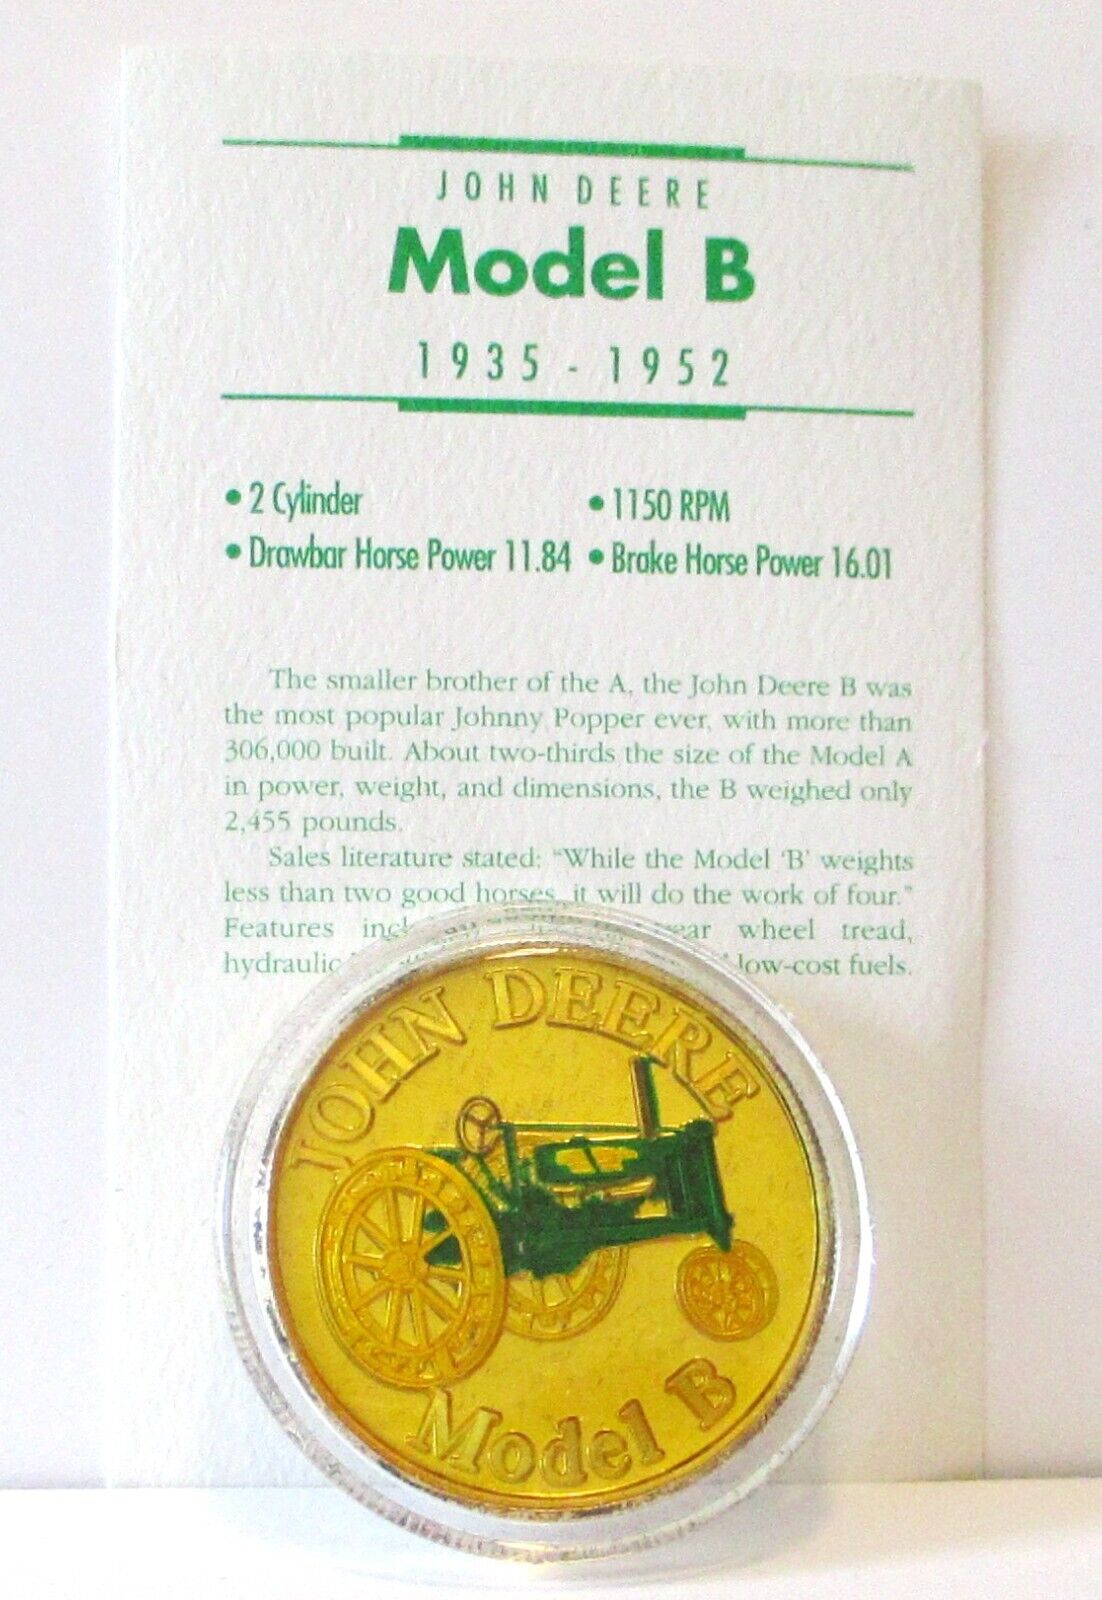 John Deere Silver Round Coin  1 oz  .999  Fine Gold Colored  jd Model B Tractor